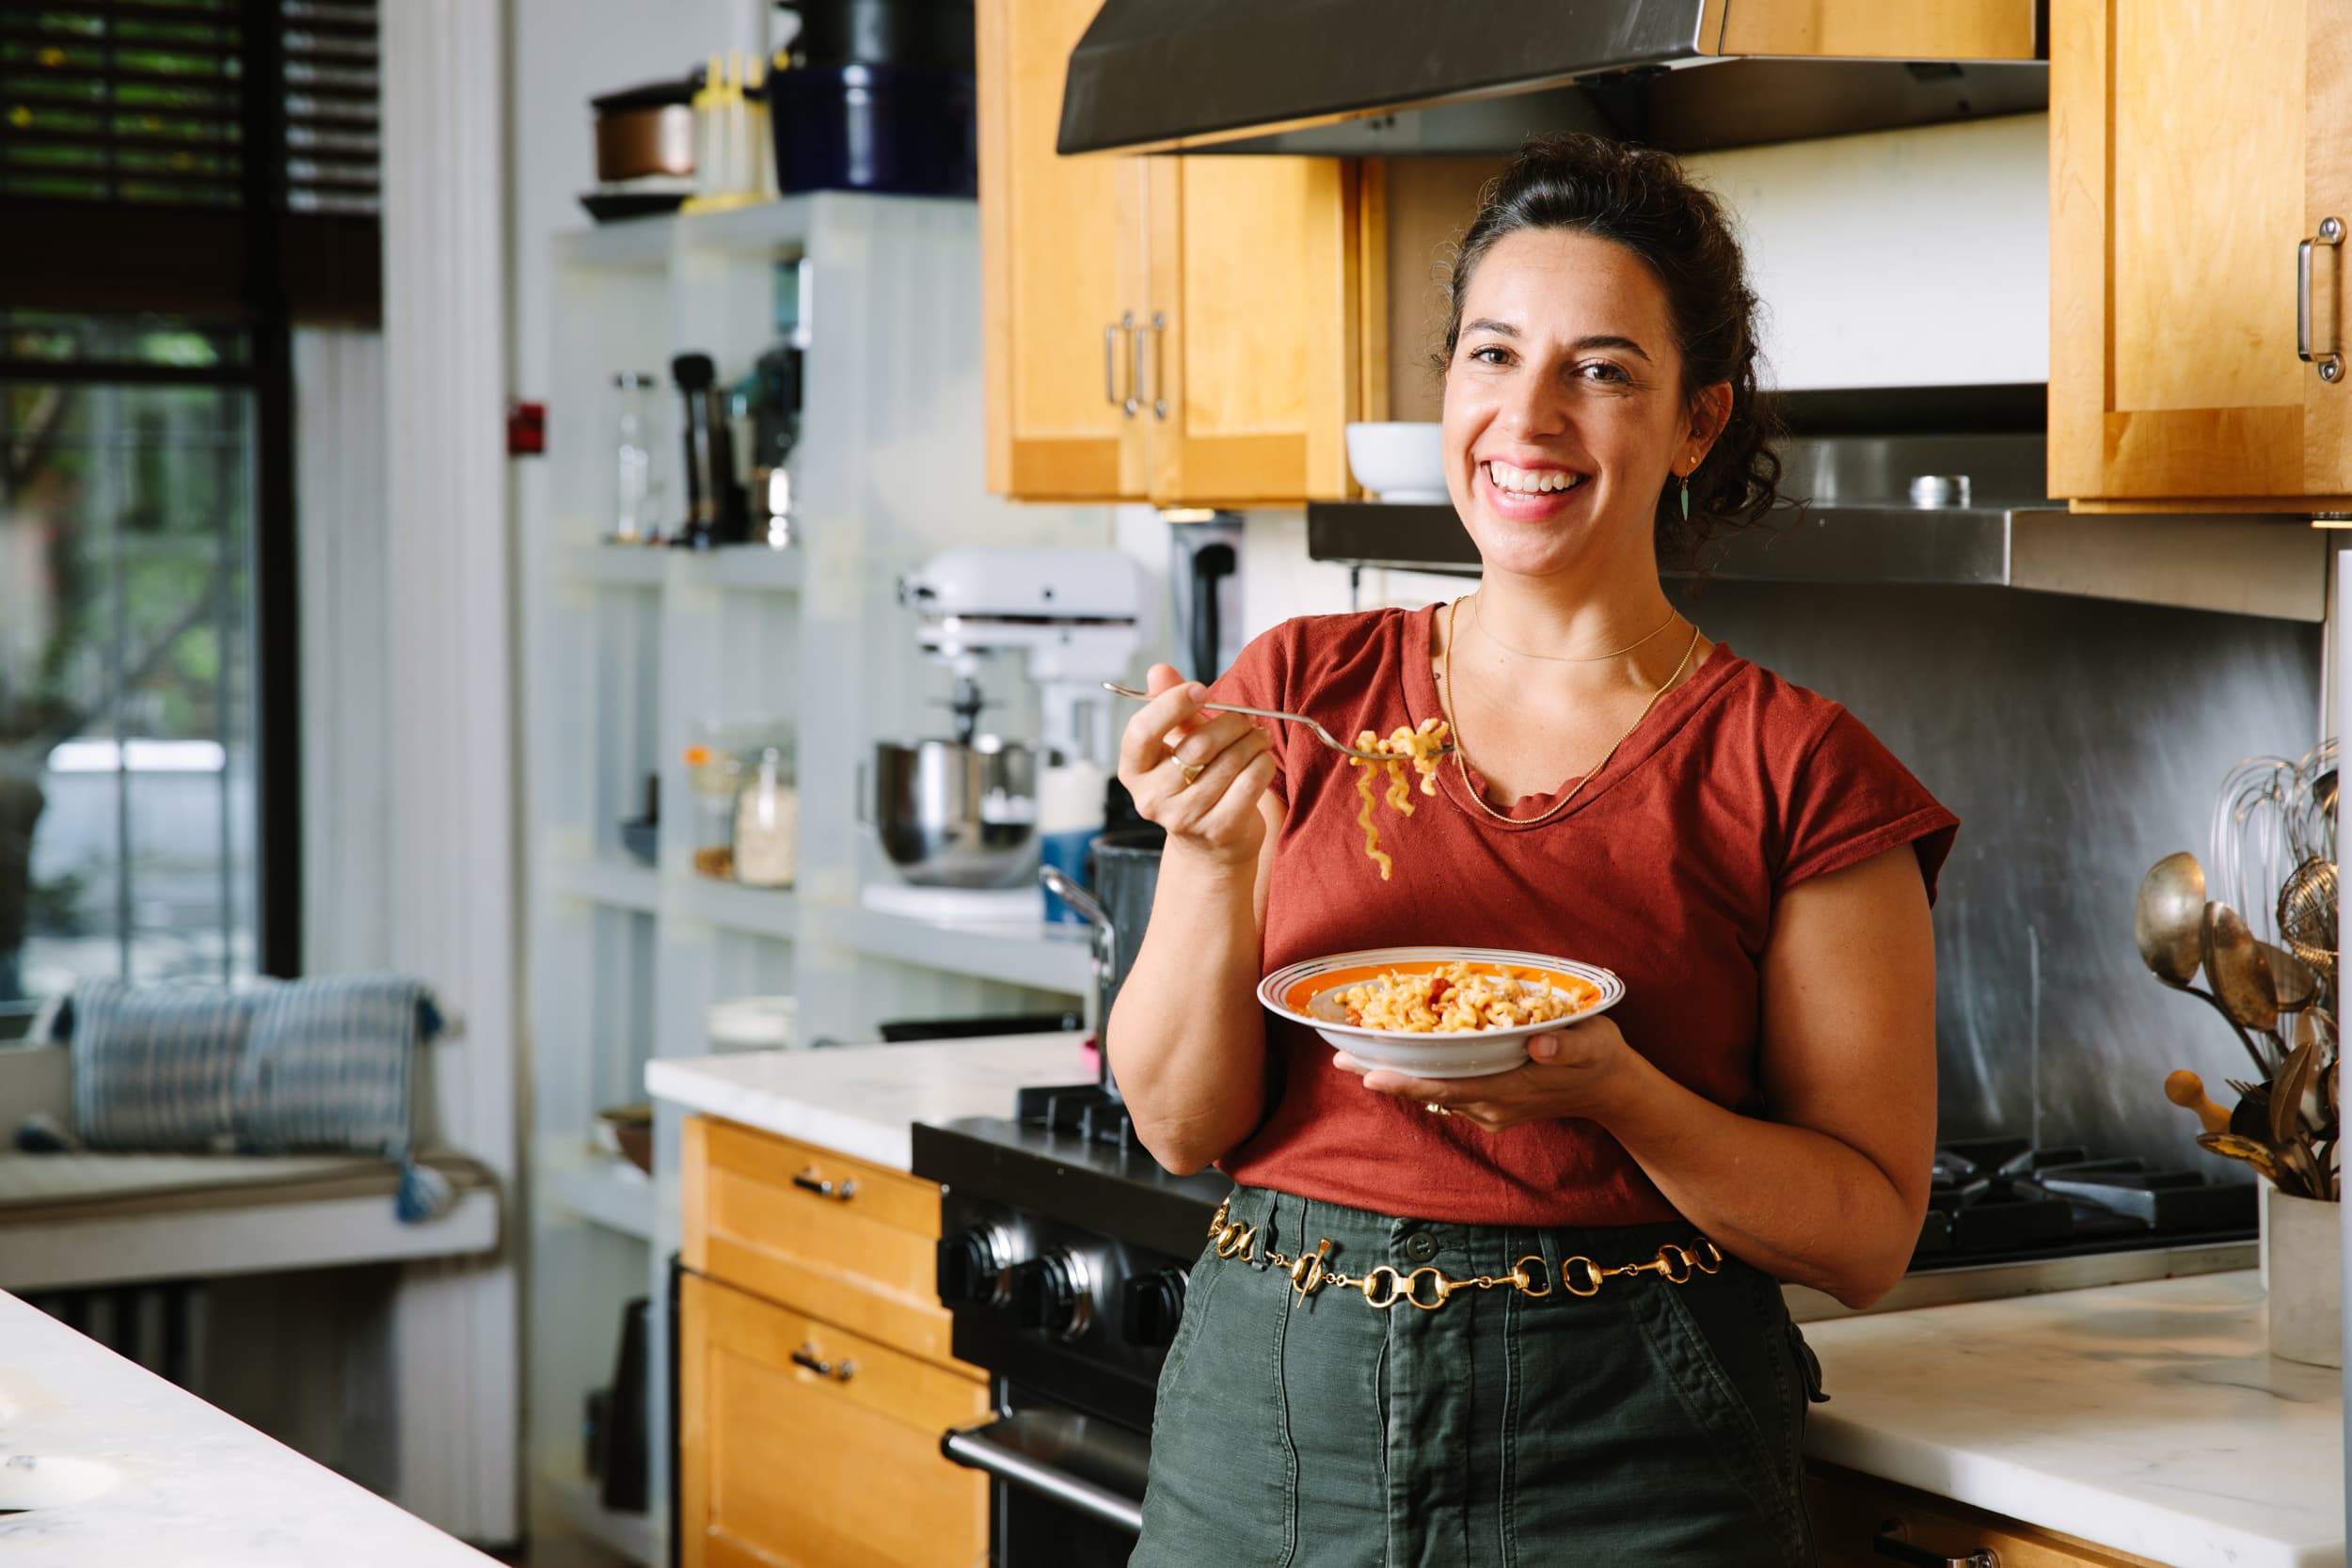 Bon Appetit S Carla Lalli Music Shares Her Week Of Dinners Kitchn Today we ...